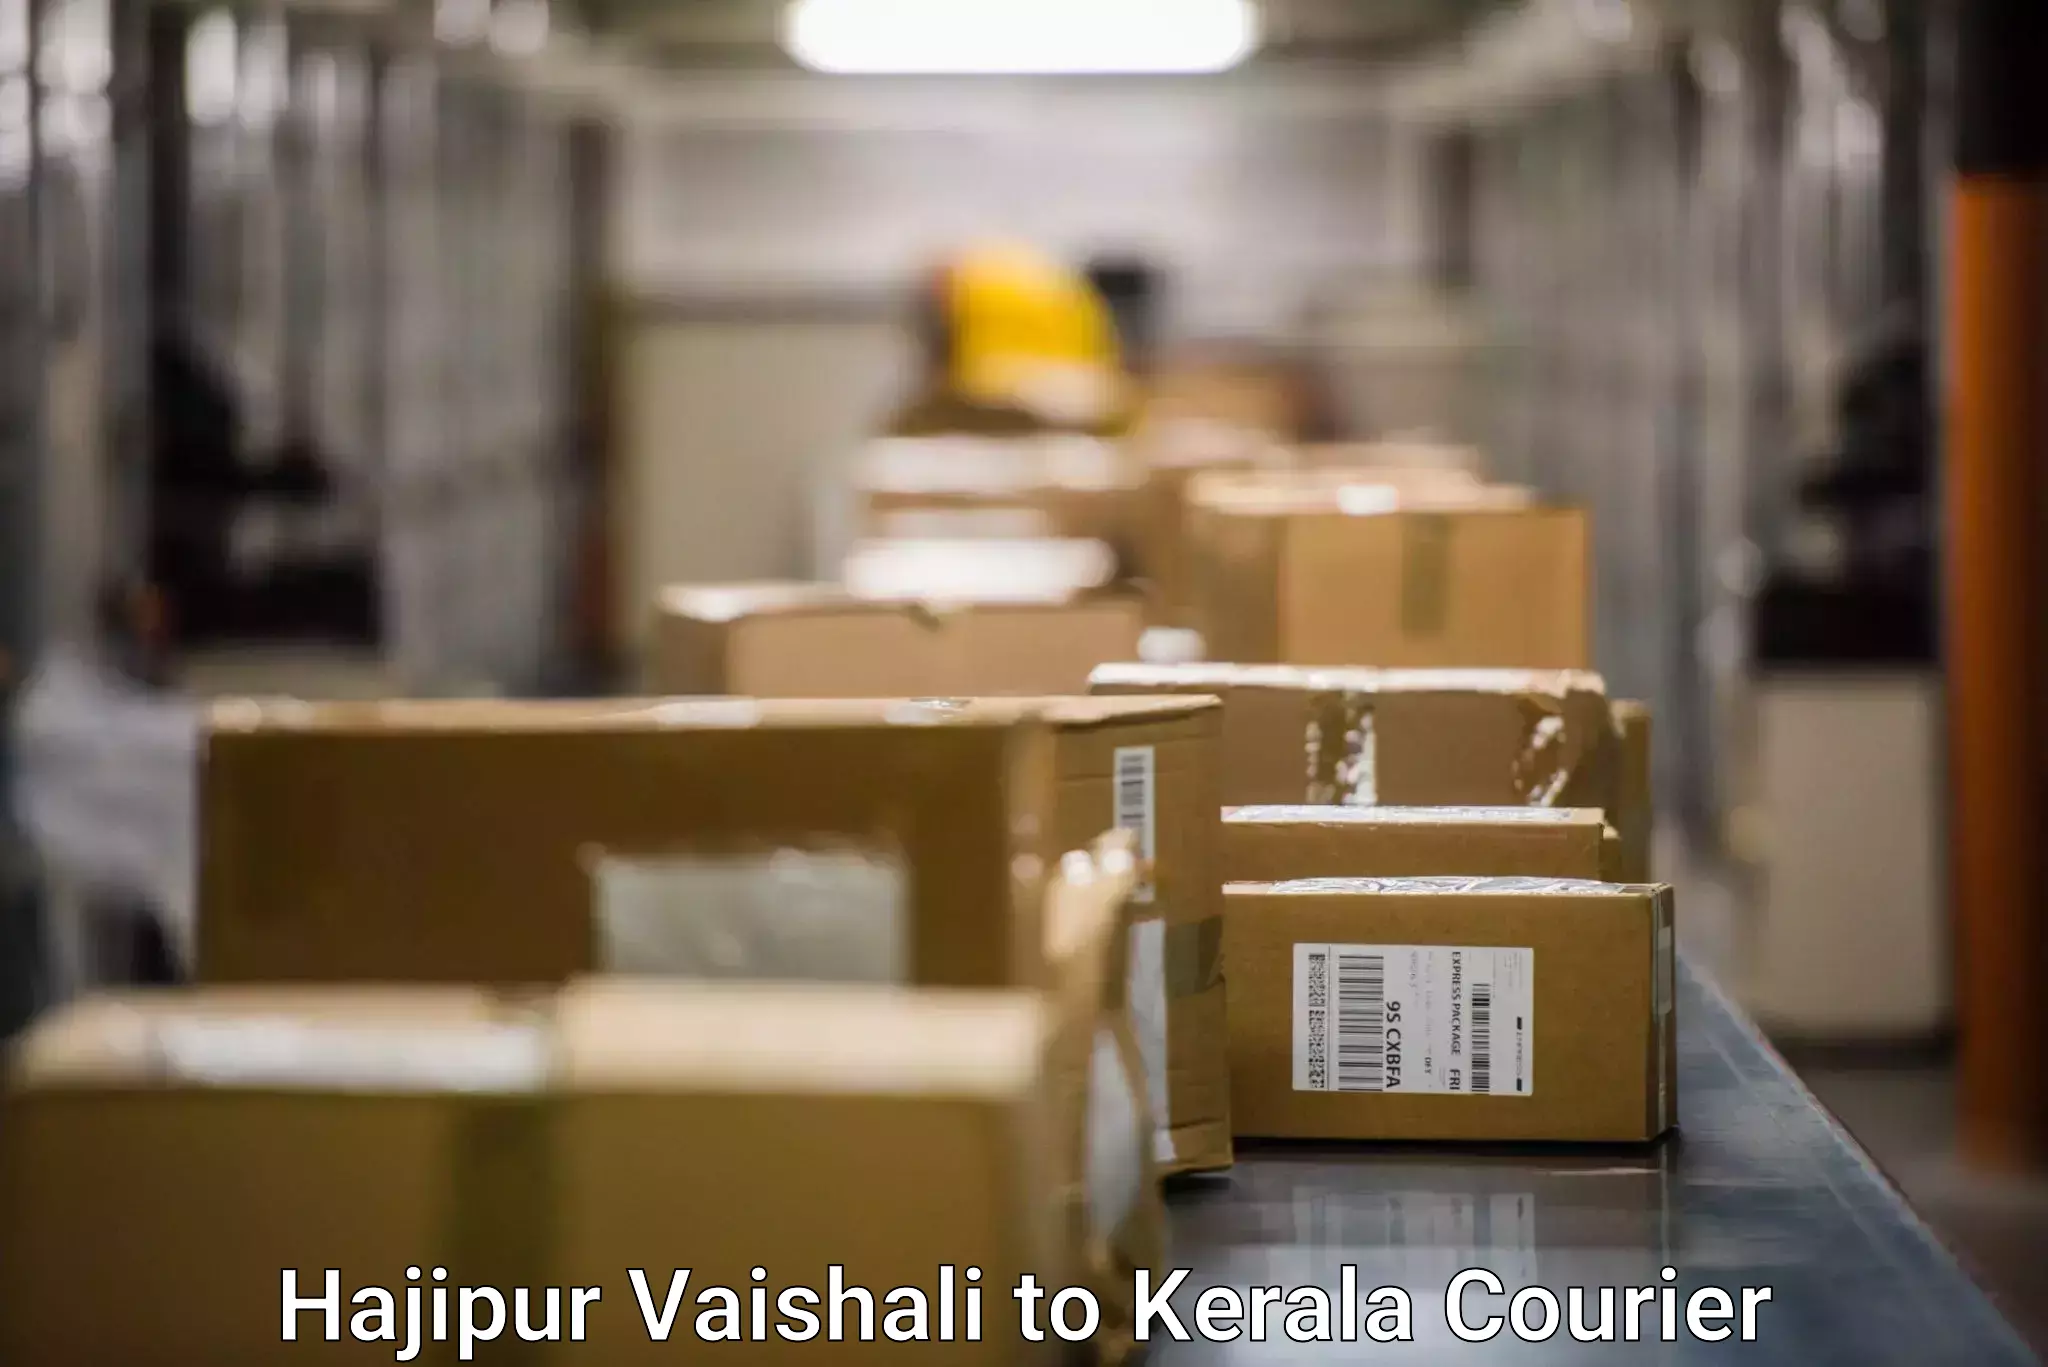 Global courier networks Hajipur Vaishali to Allepey